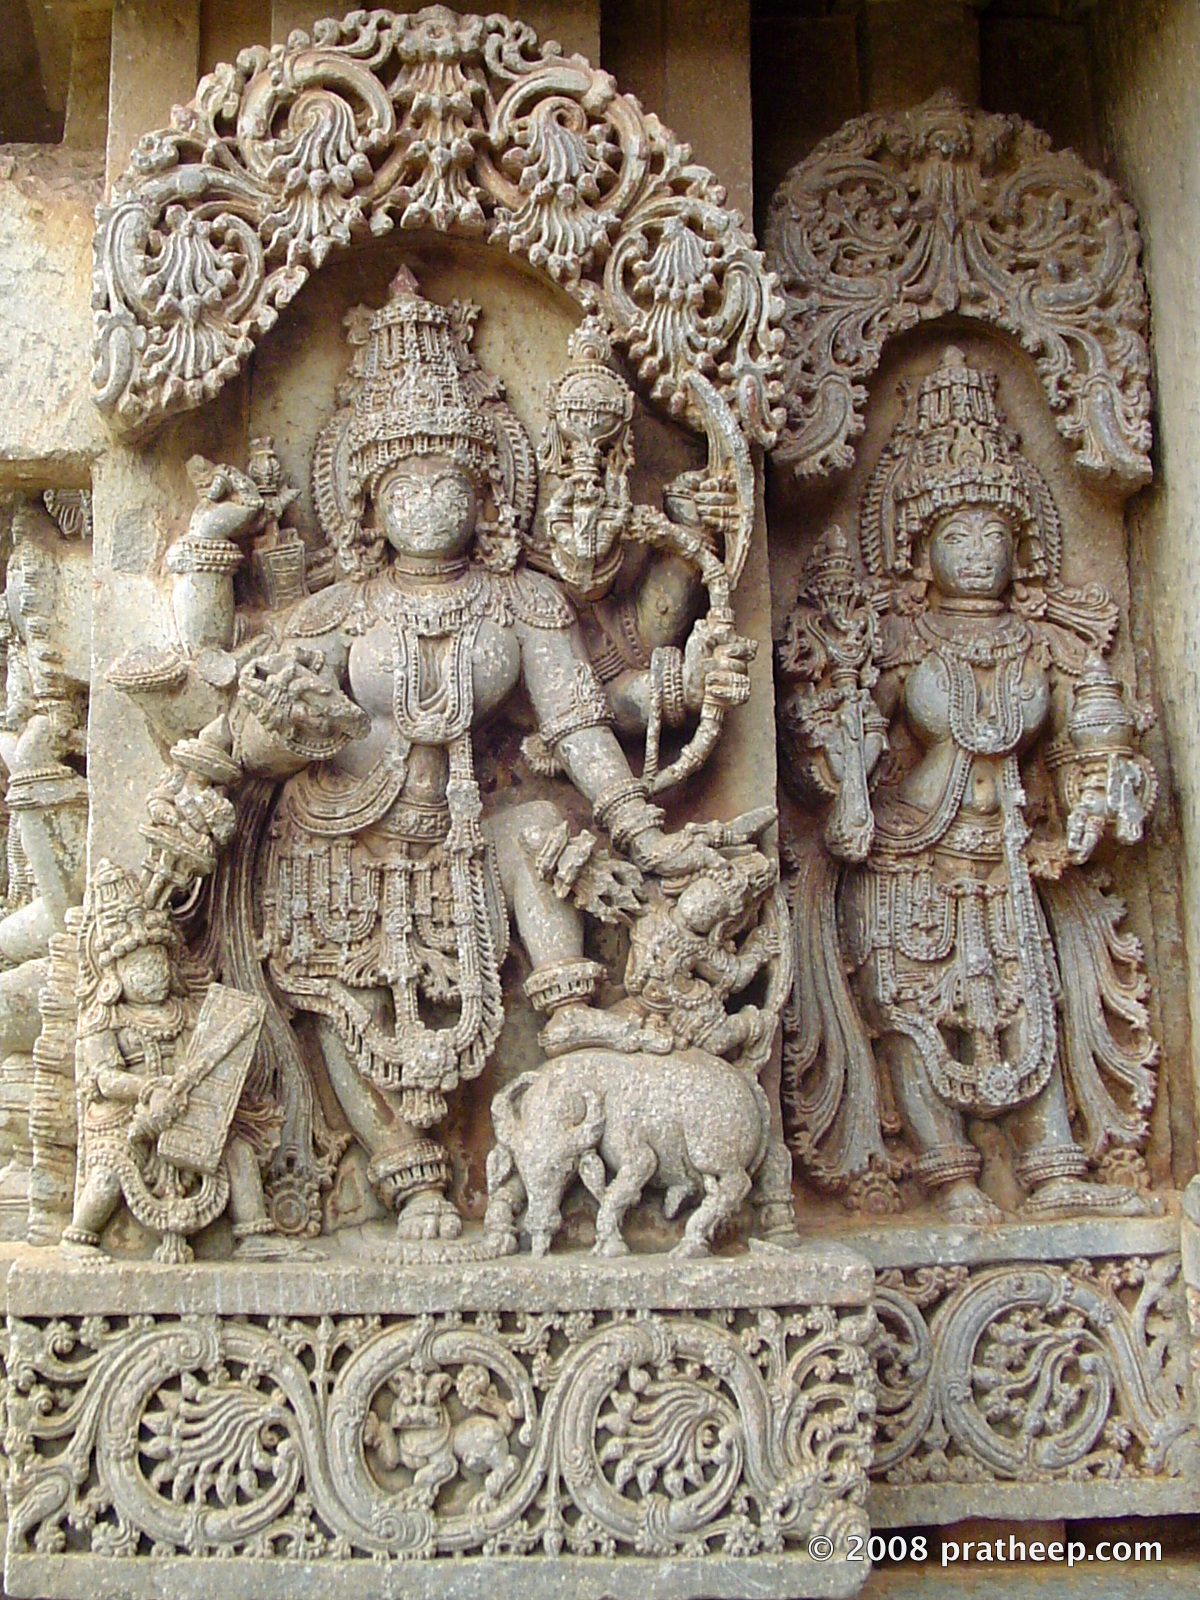 Mahishasura is a buffalo demon in Hindu mythology, known for deception and who pursued his evil ways by shape shifting into different forms. He was ultimately killed by Durga in her Mahishasuramardini form. It is an important symbolism-filled legend in Hindu mythology, particularly Shaktism. Image at Hosaholalu temple.